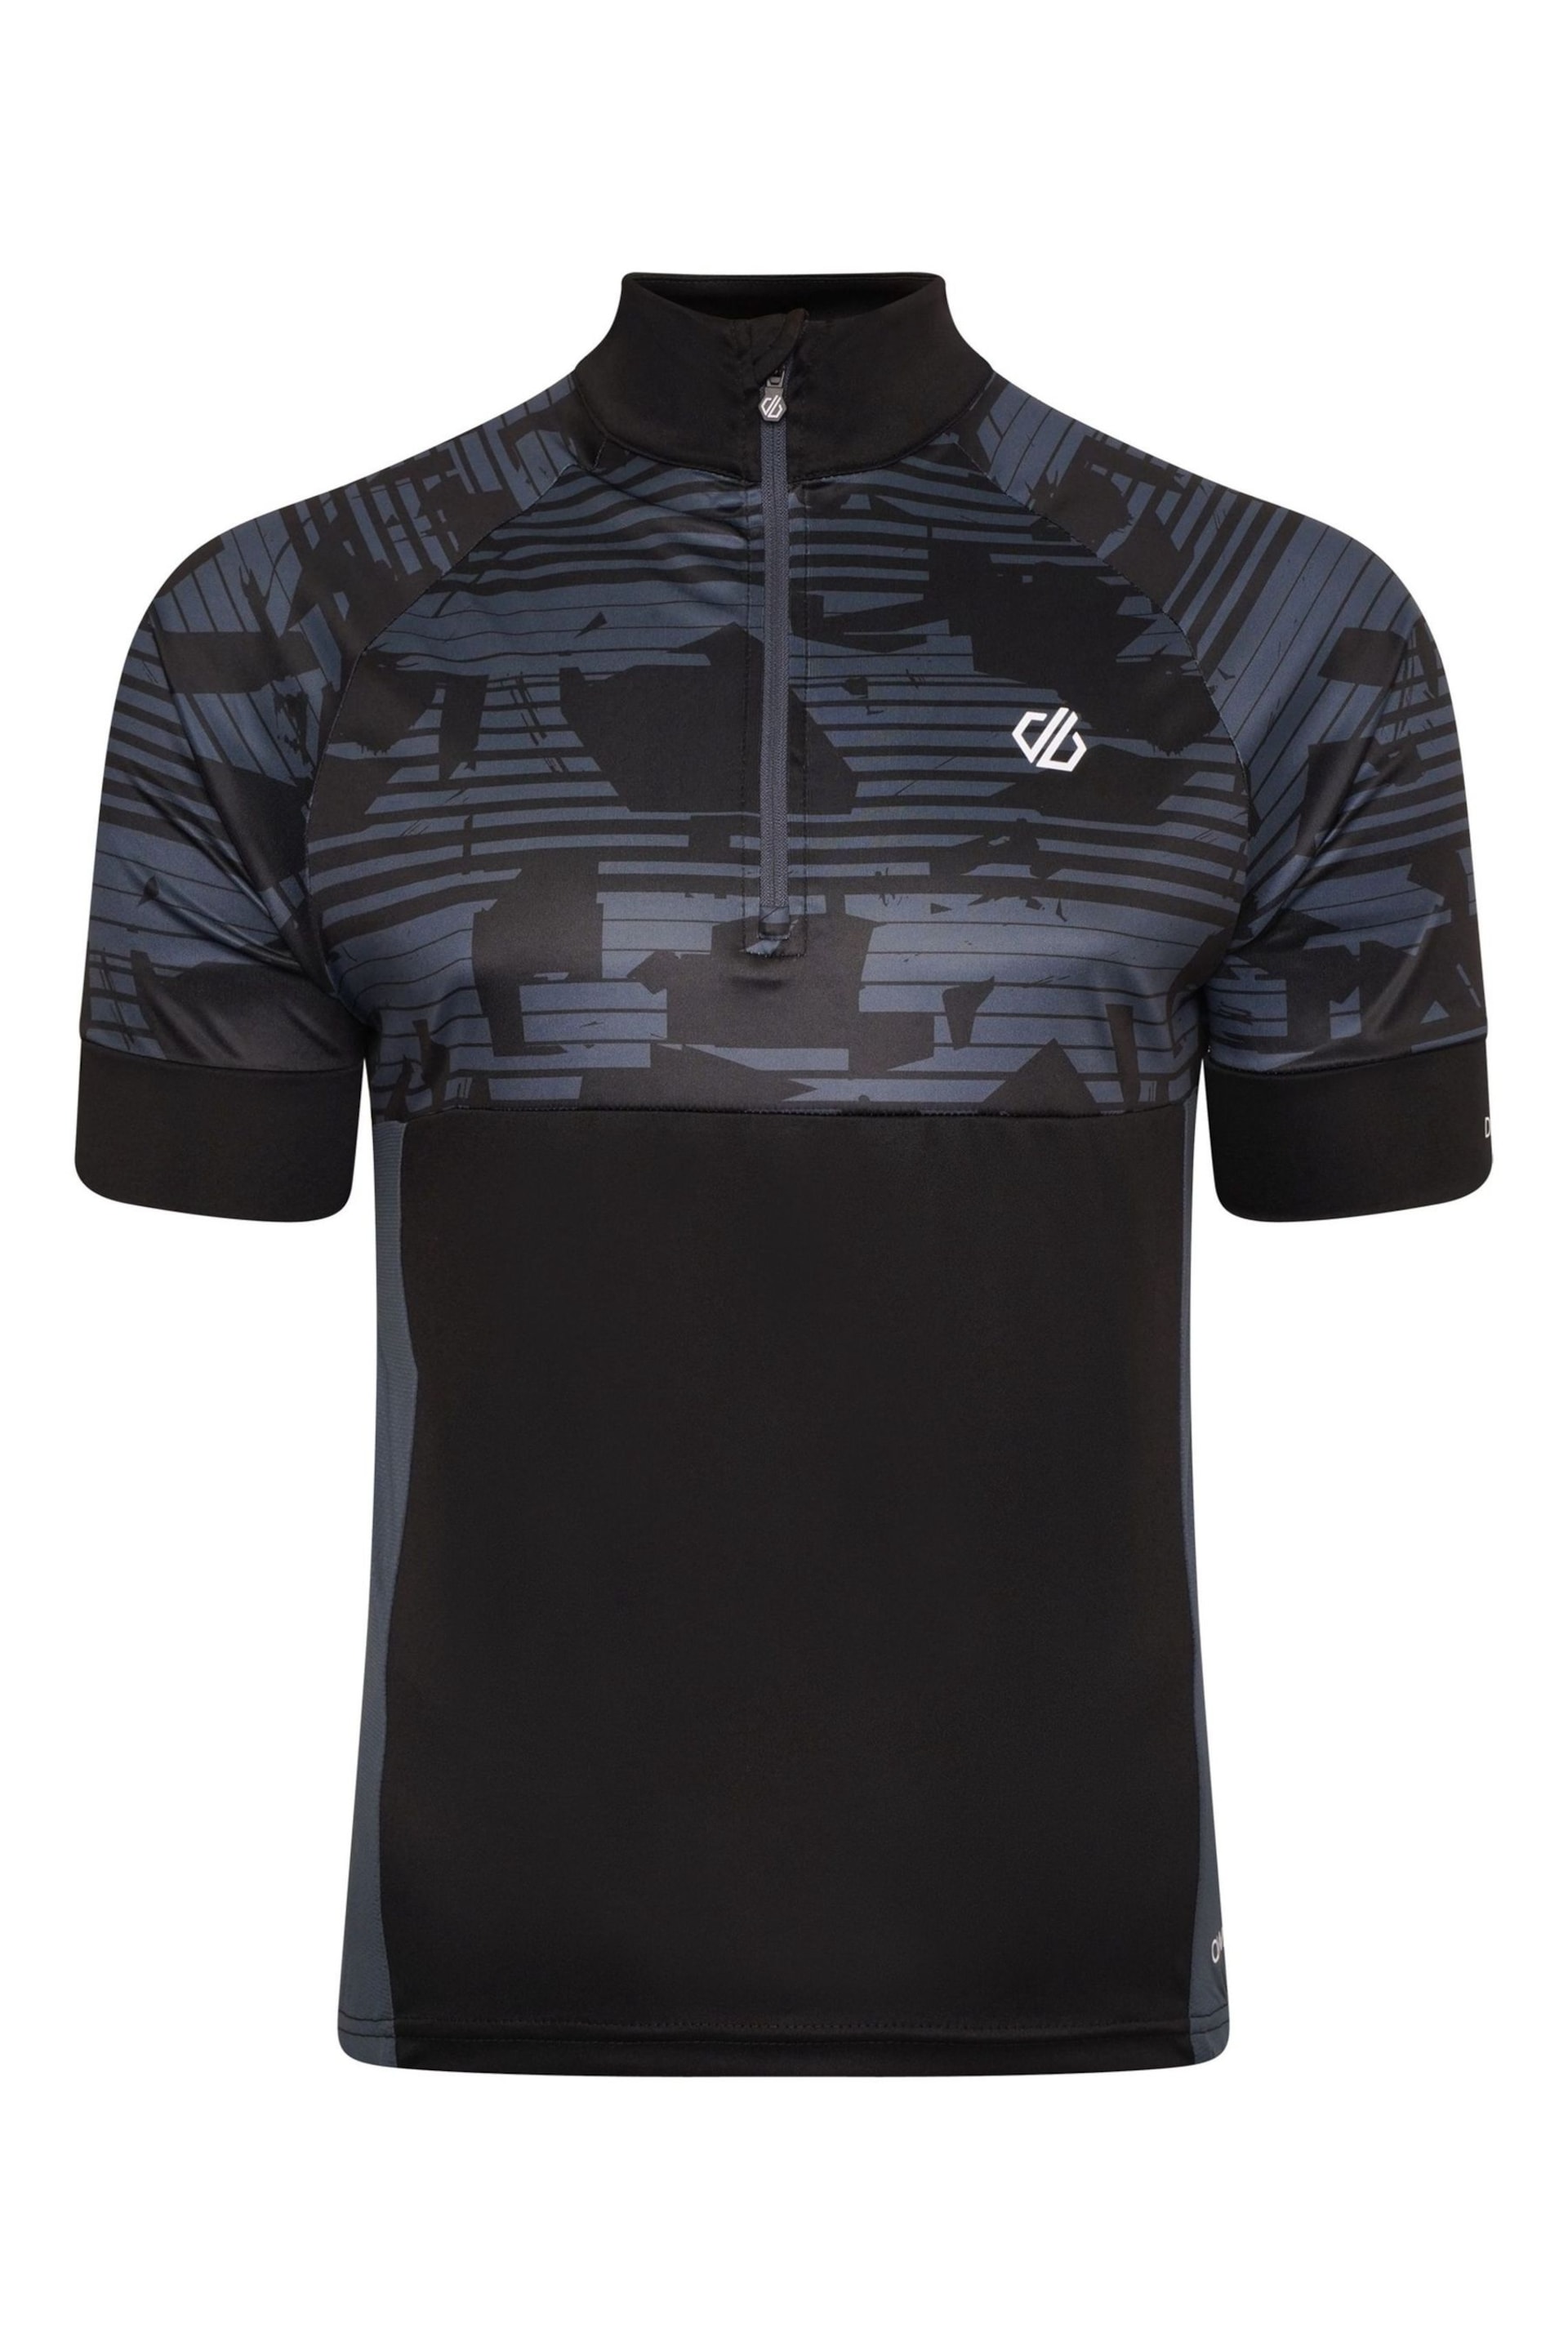 Dare 2b Stay The Course II Black Jersey - Image 1 of 3